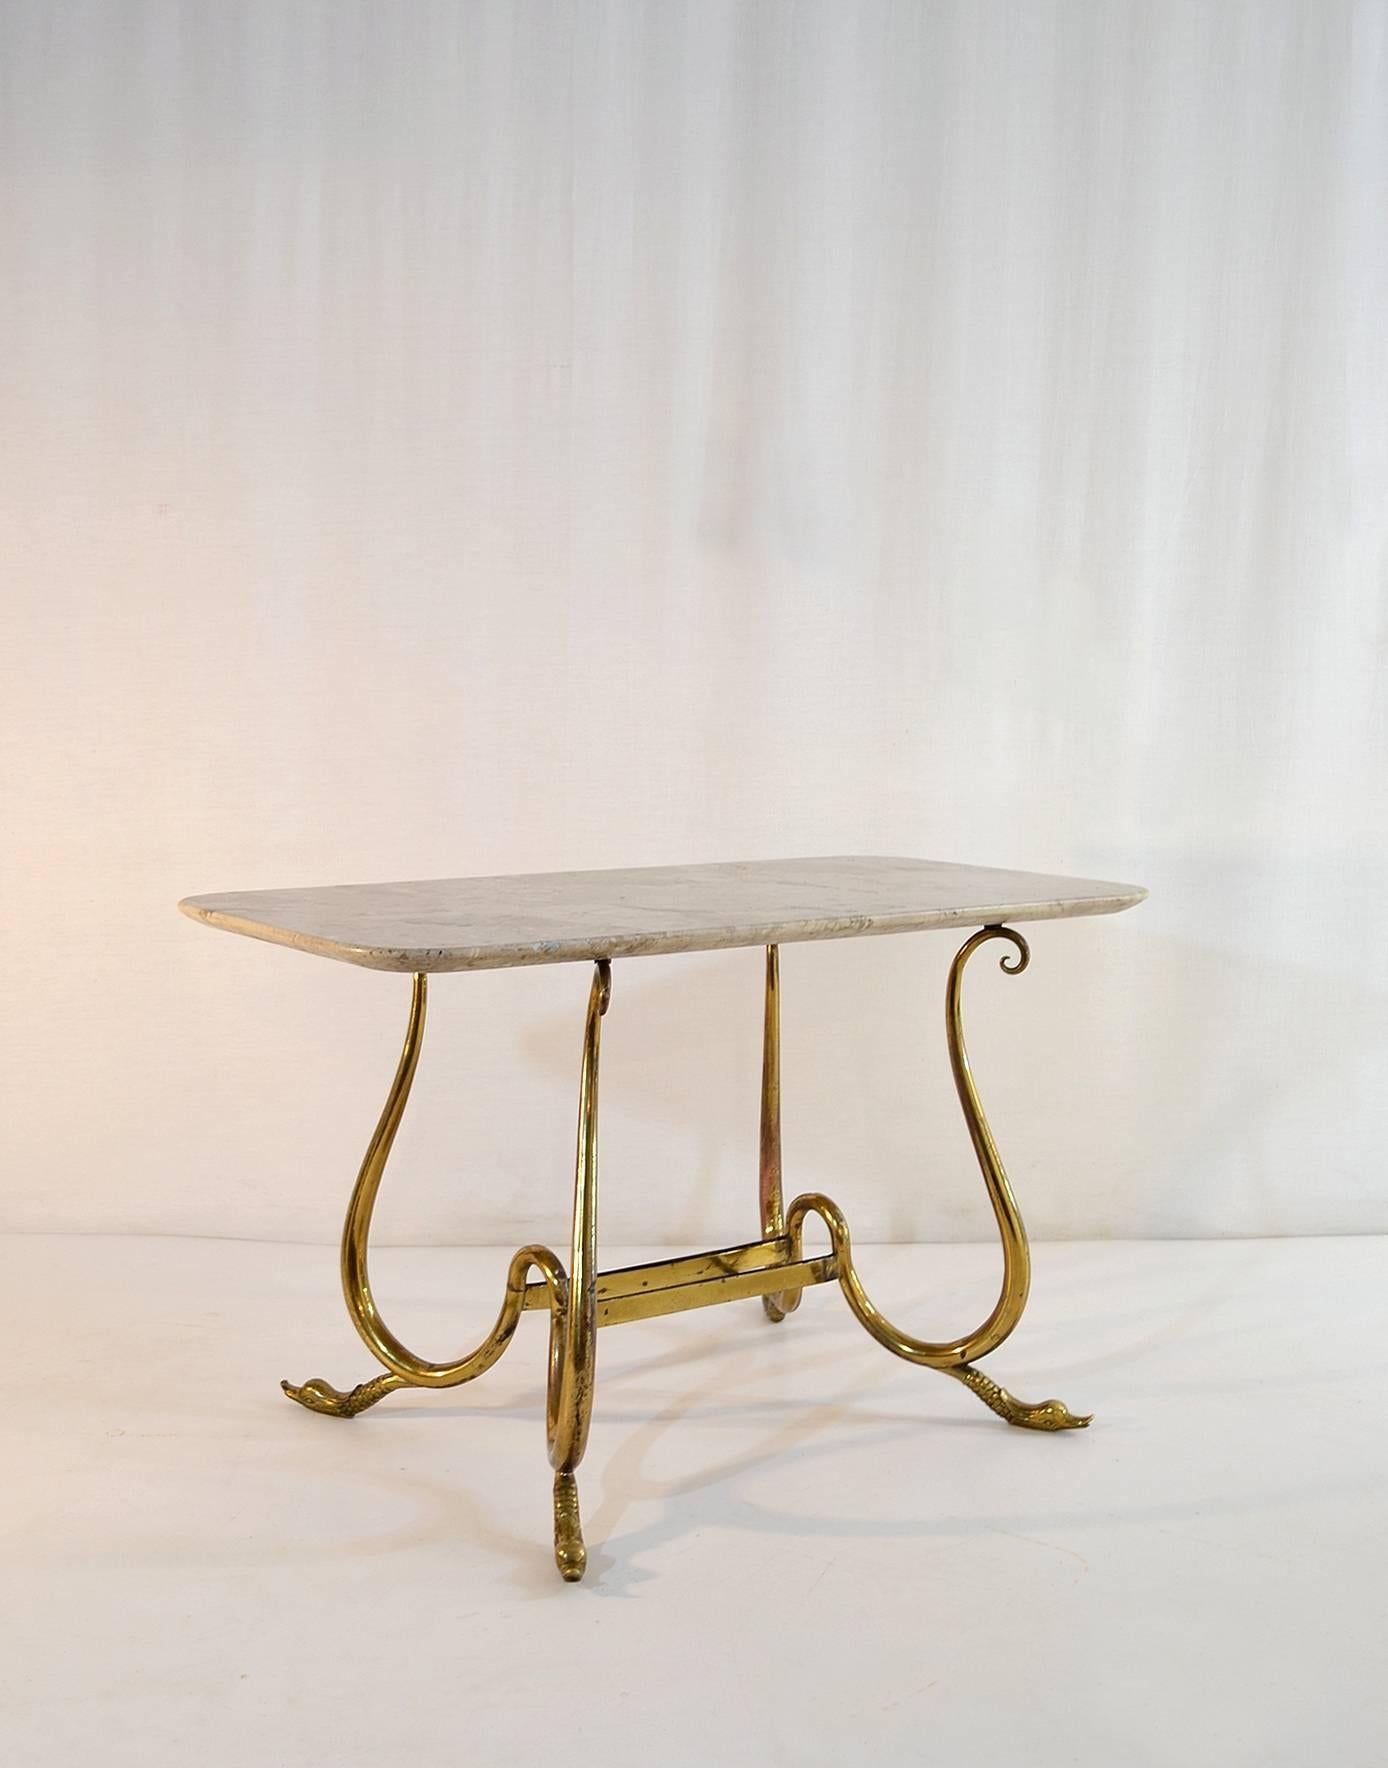 Midcentury Italian Marble Cocktail Table with Brass Legs For Sale 2